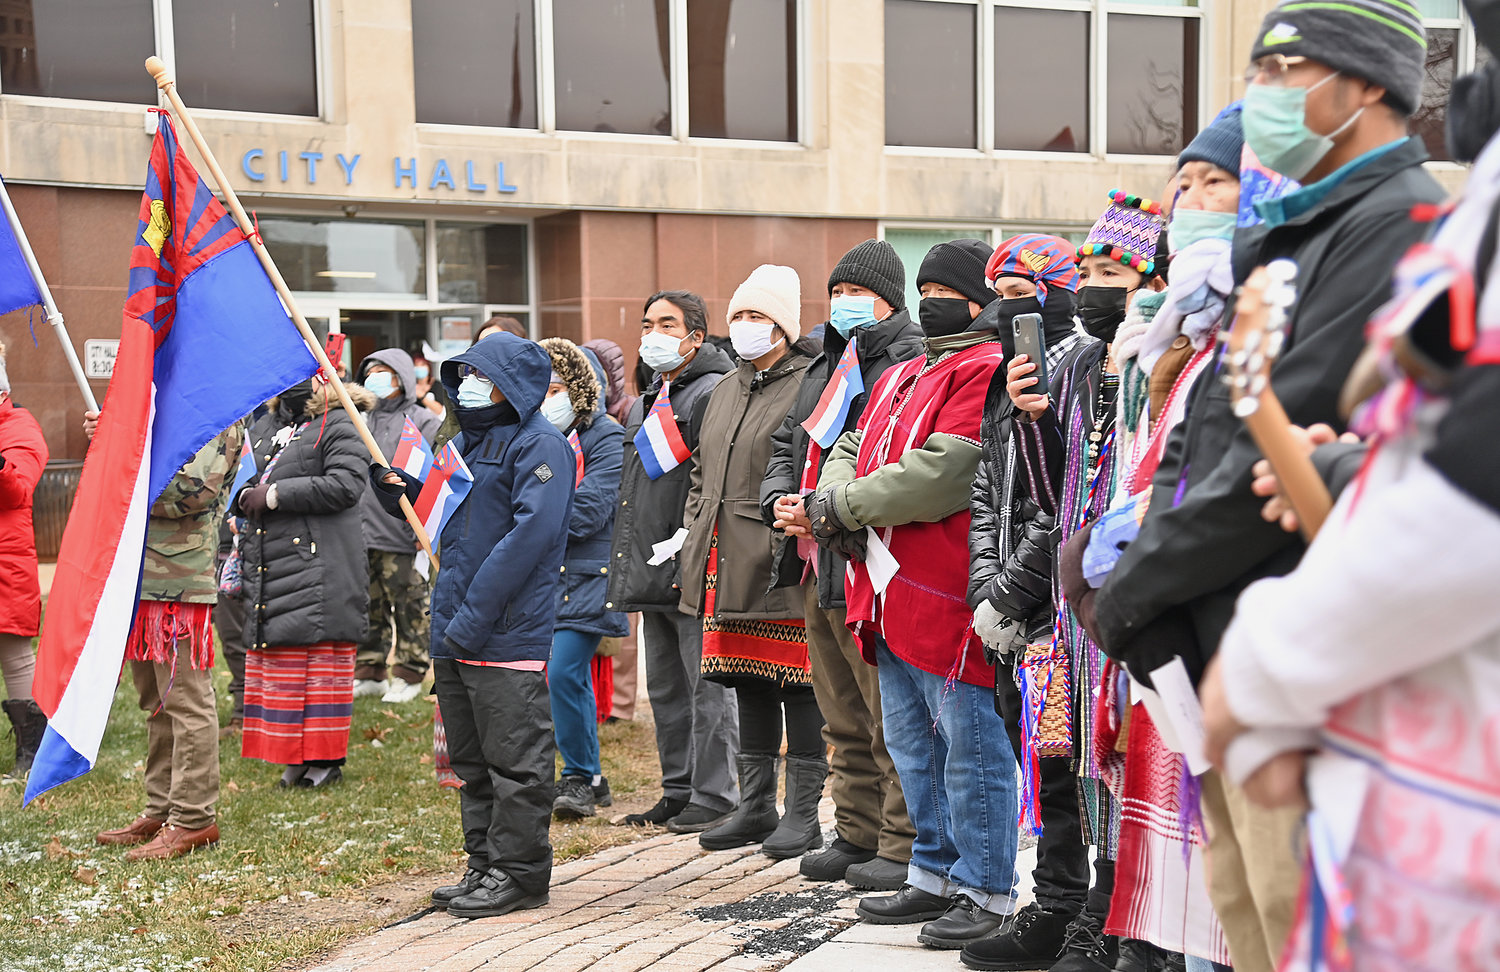 MARKING THE OCCASION — Members of Utica’s Karen community along with fellow residents and supporters attend a flag raising ceremony on Wednesday, Jan. 5, 2022.